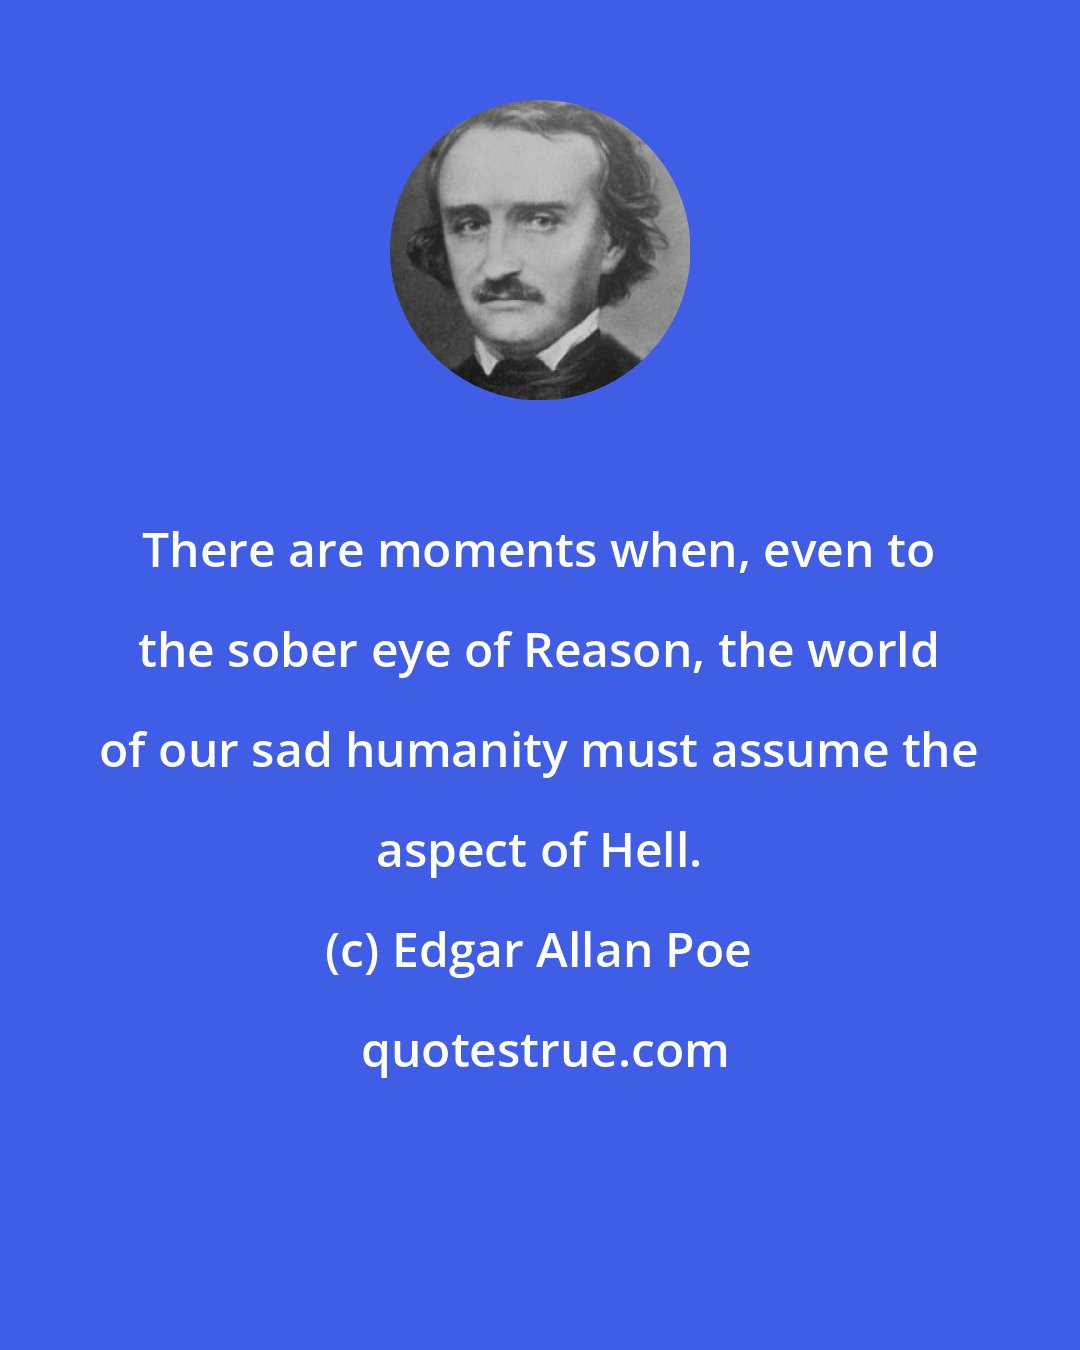 Edgar Allan Poe: There are moments when, even to the sober eye of Reason, the world of our sad humanity must assume the aspect of Hell.